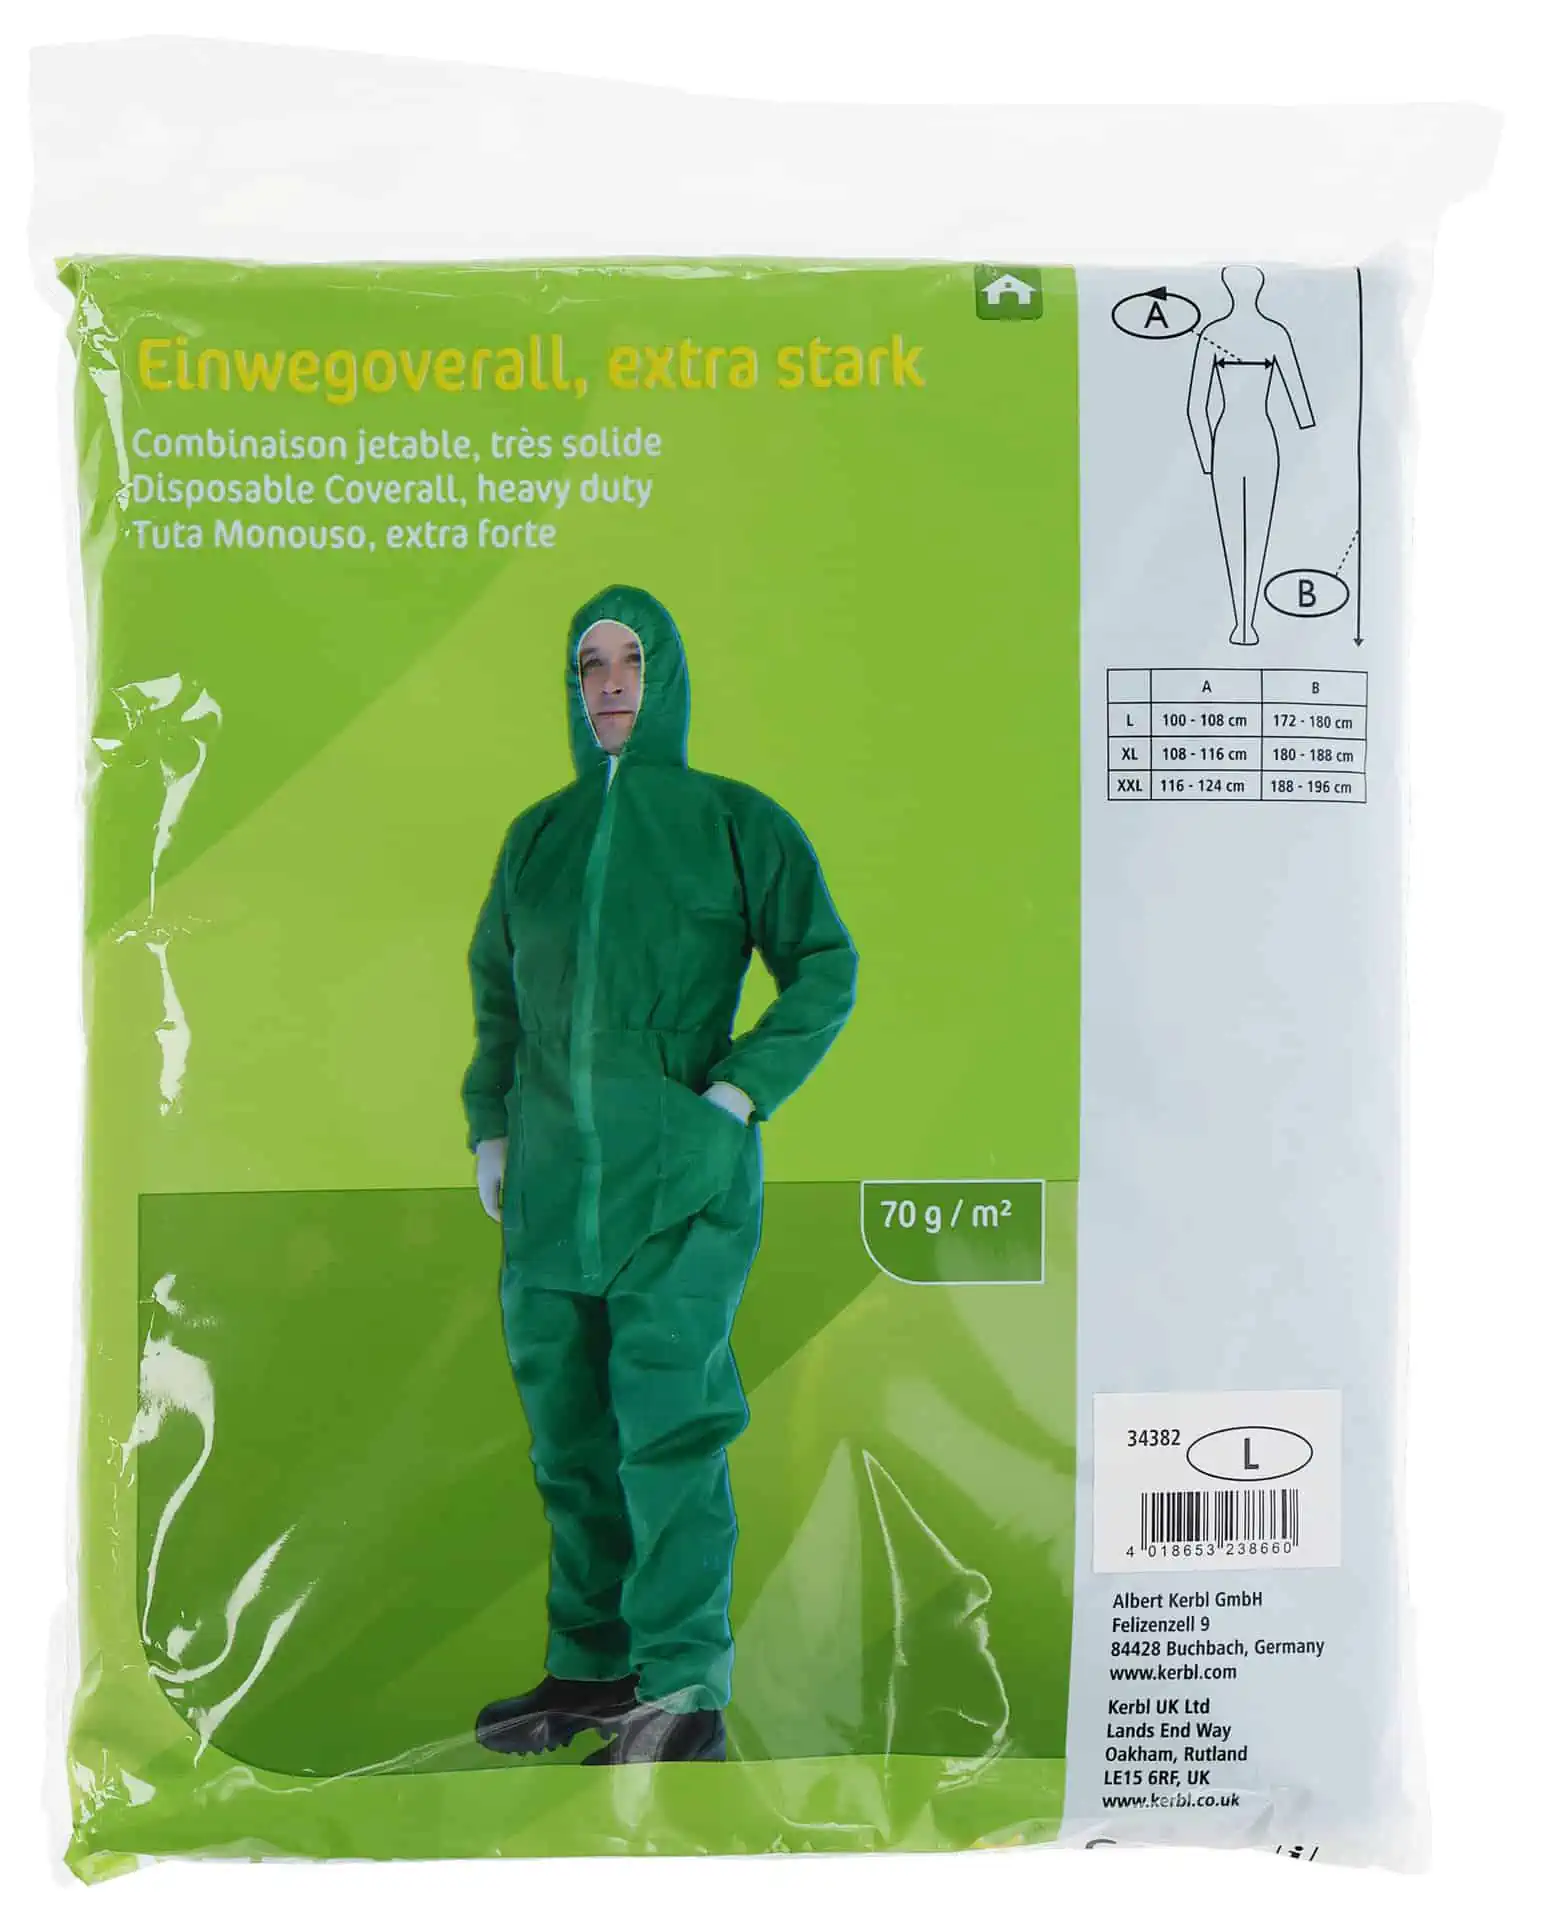 PP Disposable Overalls green Size L